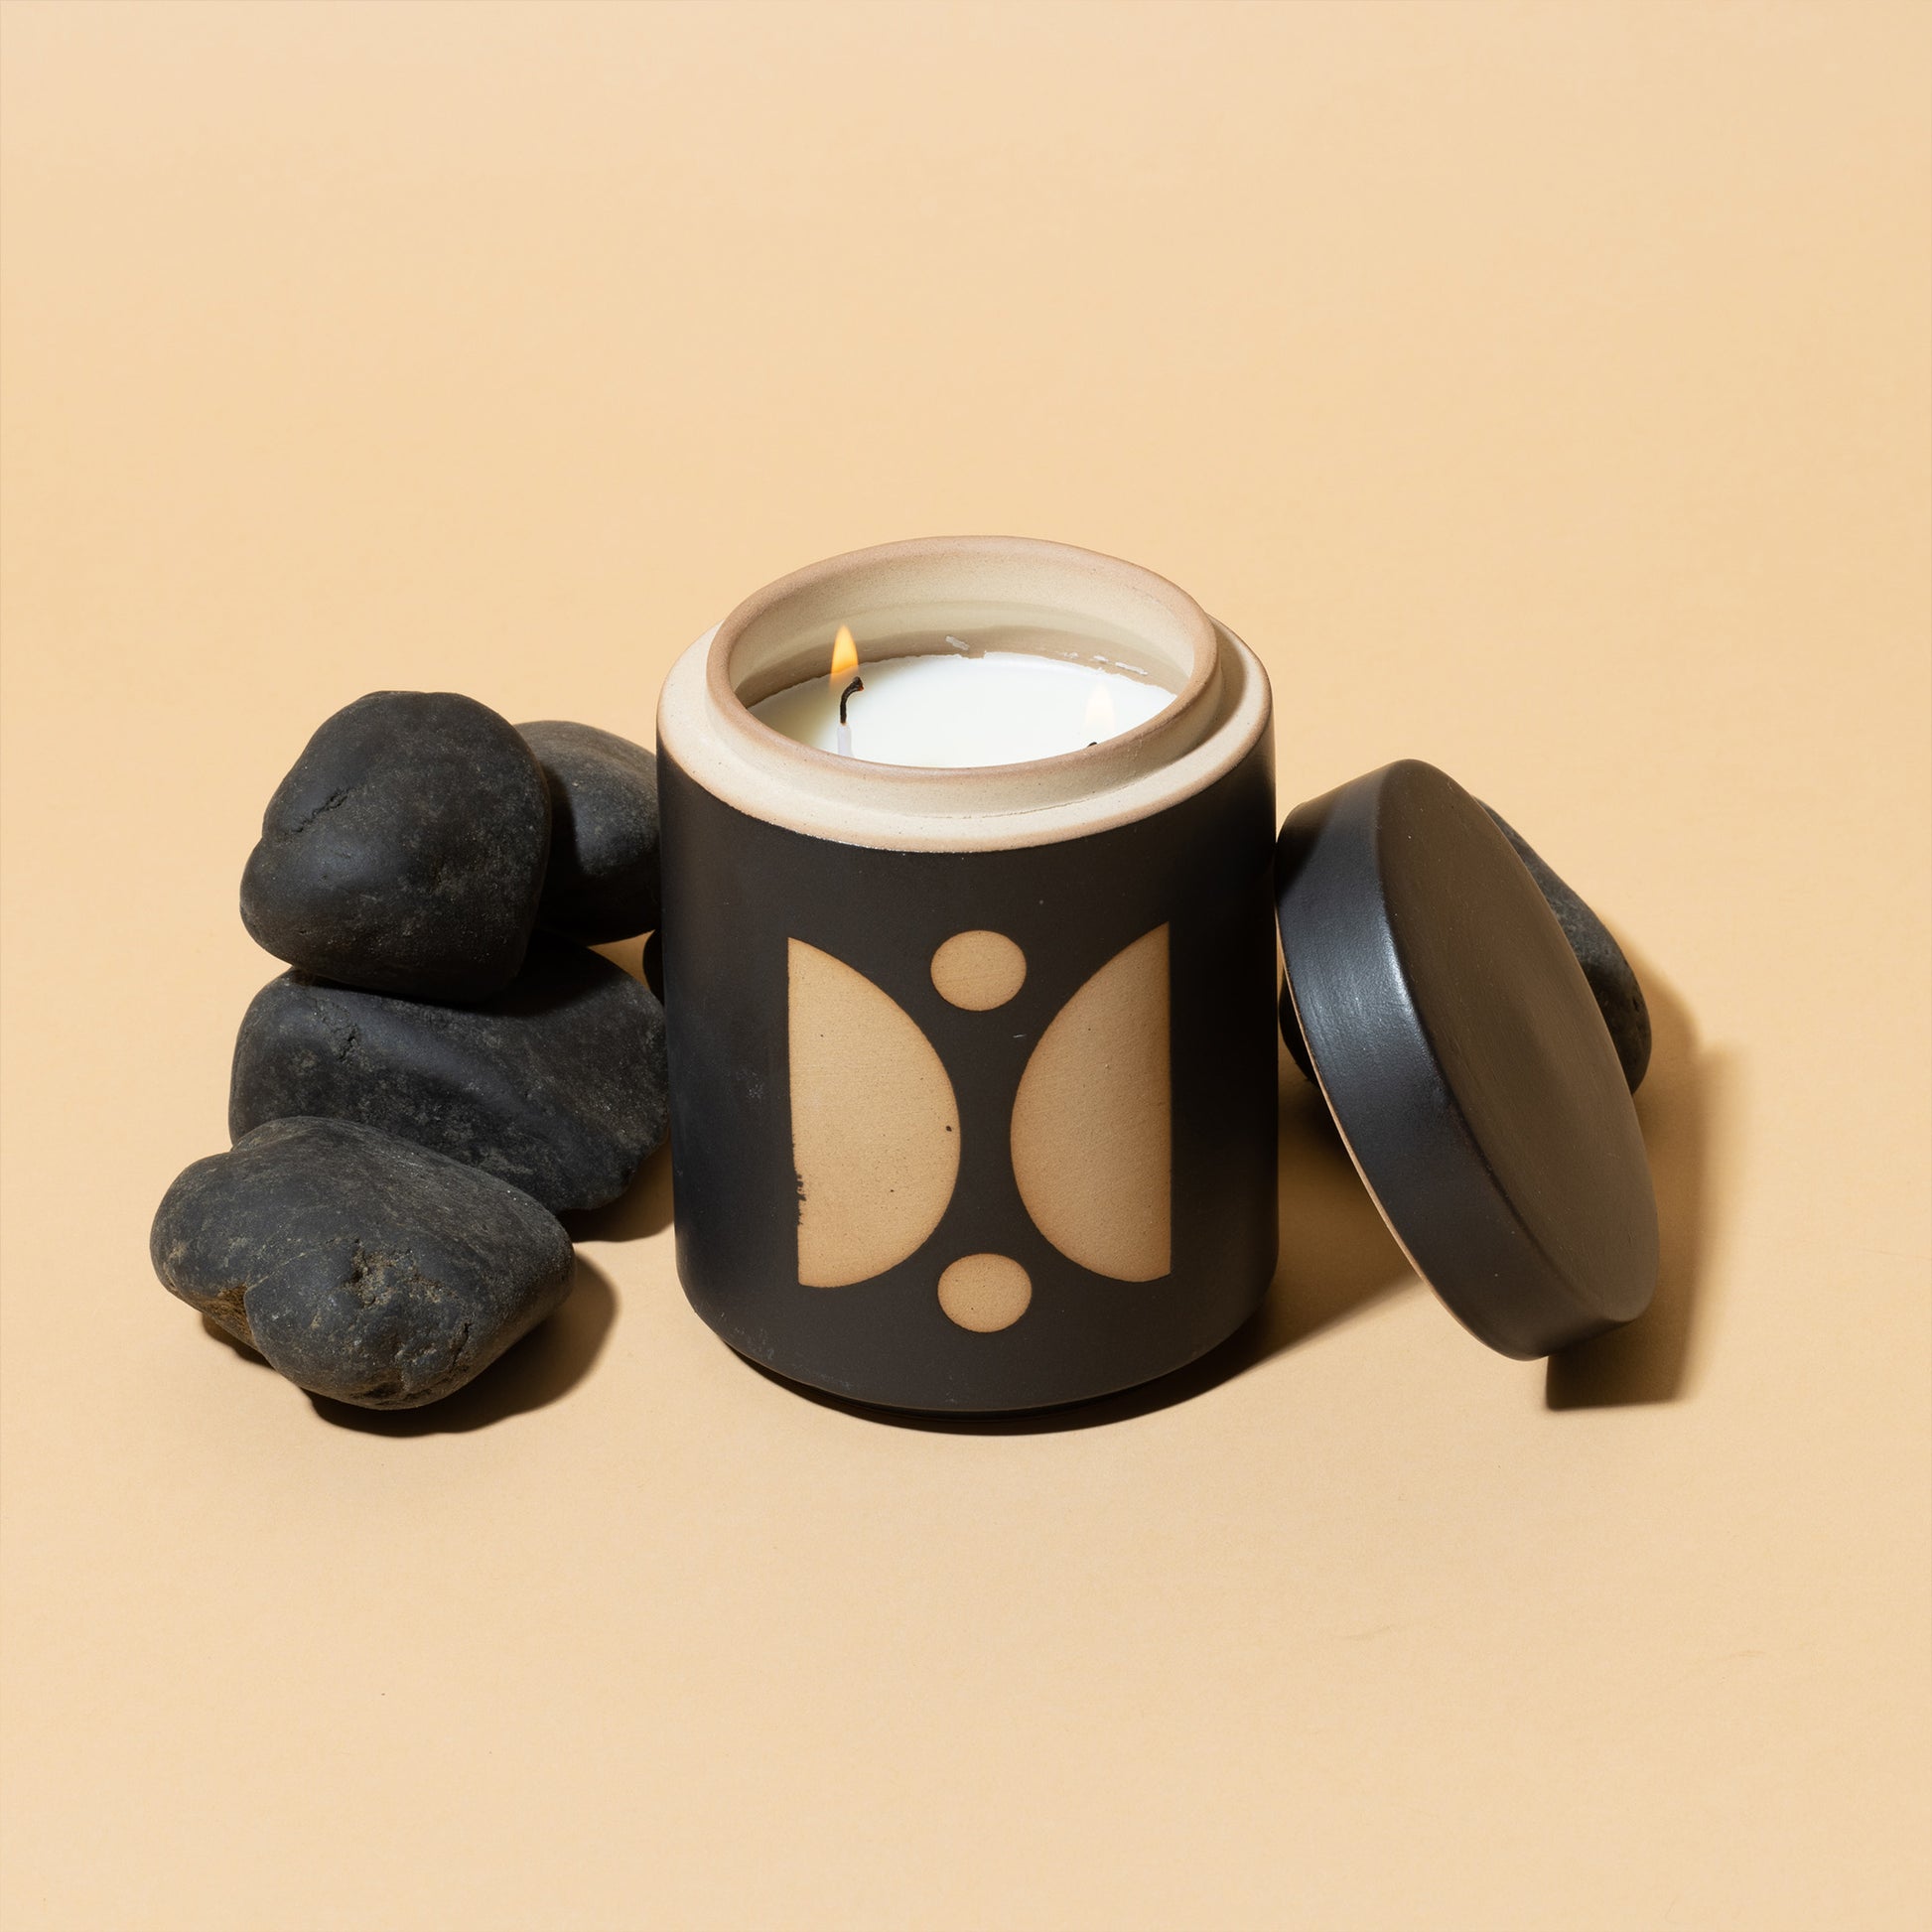 12 oz black cylindrical ceramic vessel with ceramic lid; white wax and two cotton wicks; reflected beige semi-circle design on the side